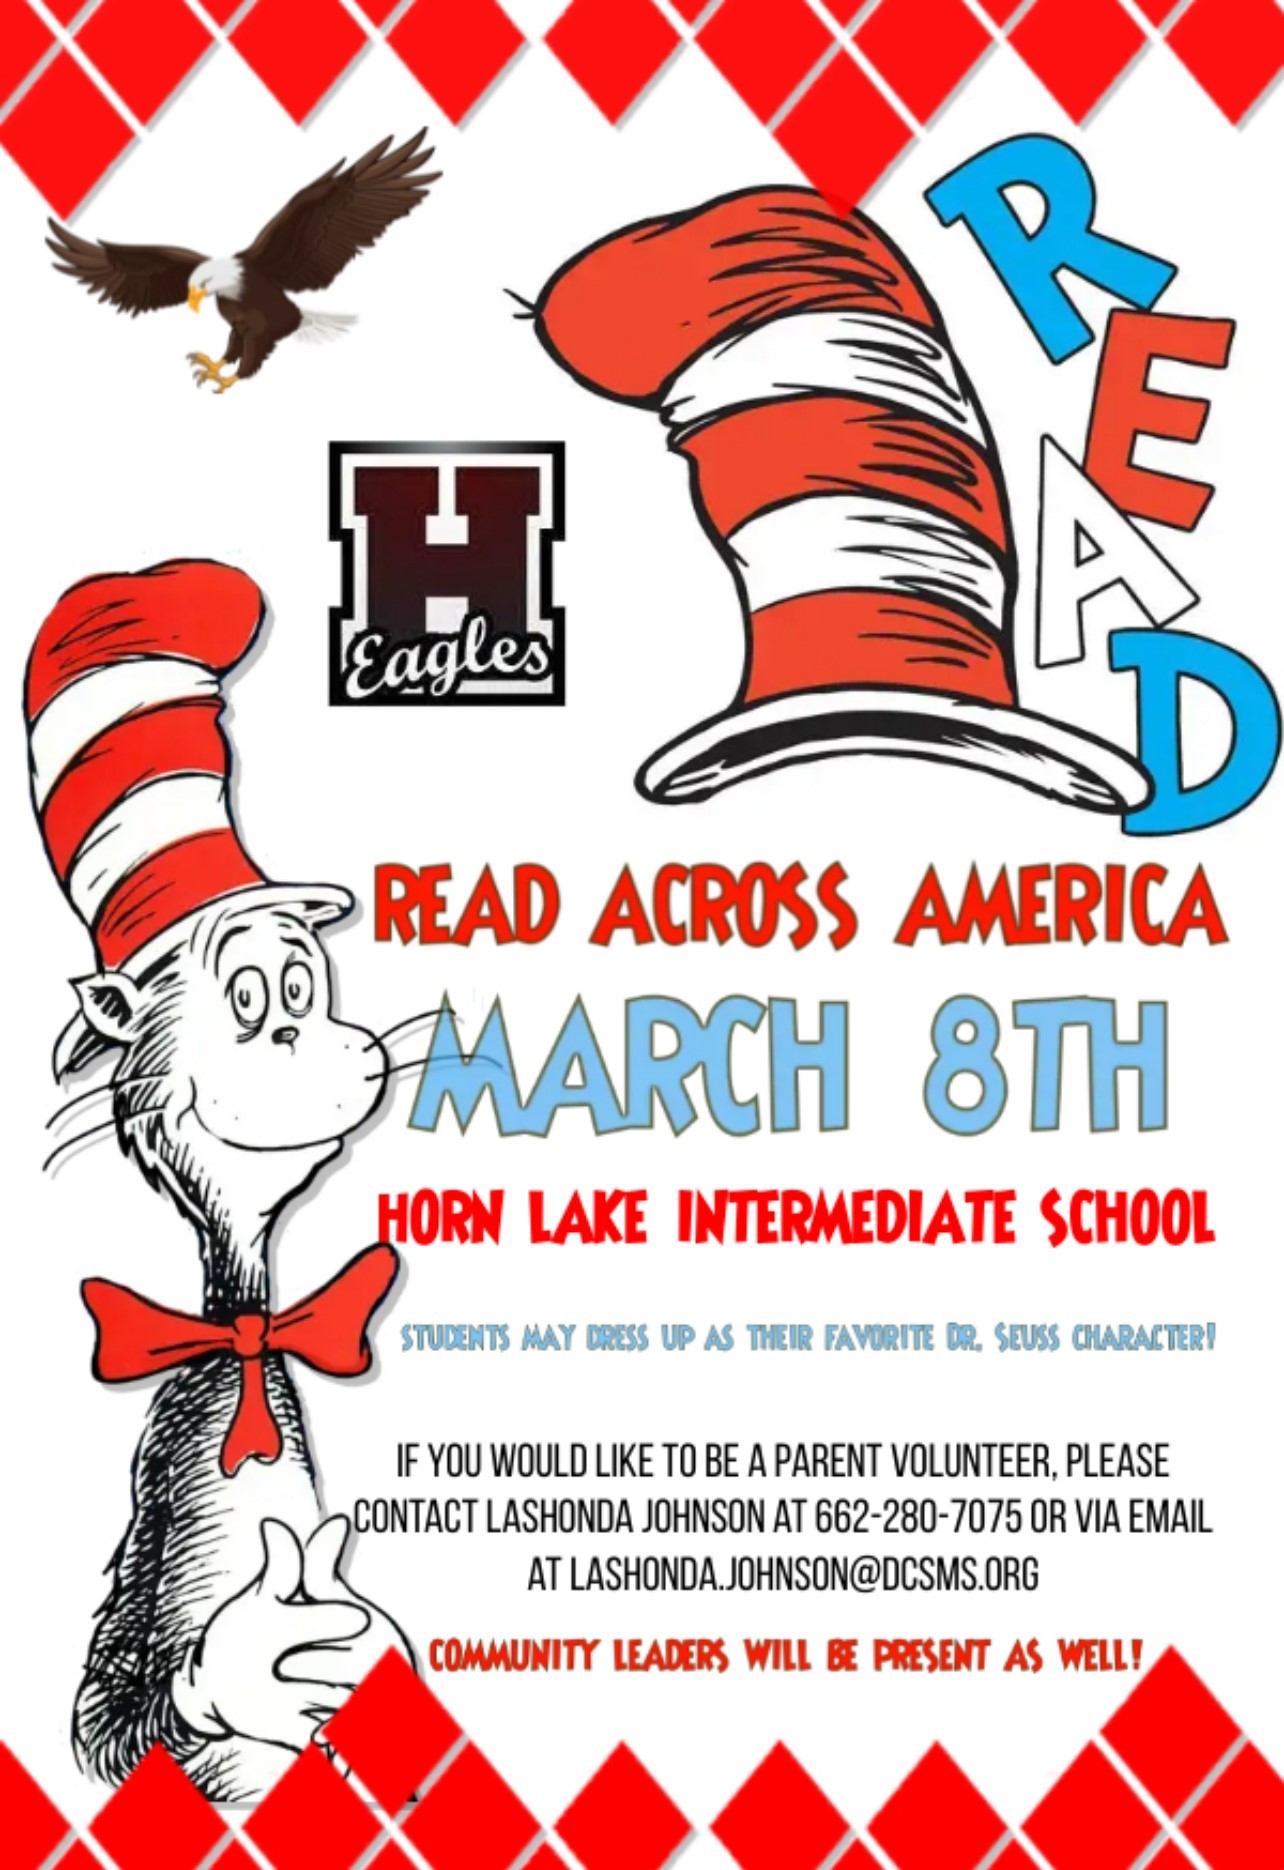 Flyer: Read Across America at Horn Lake Intermediate March 8, 2024. There will be guest readers, and students may dress up as their favorite Dr. Suess character.